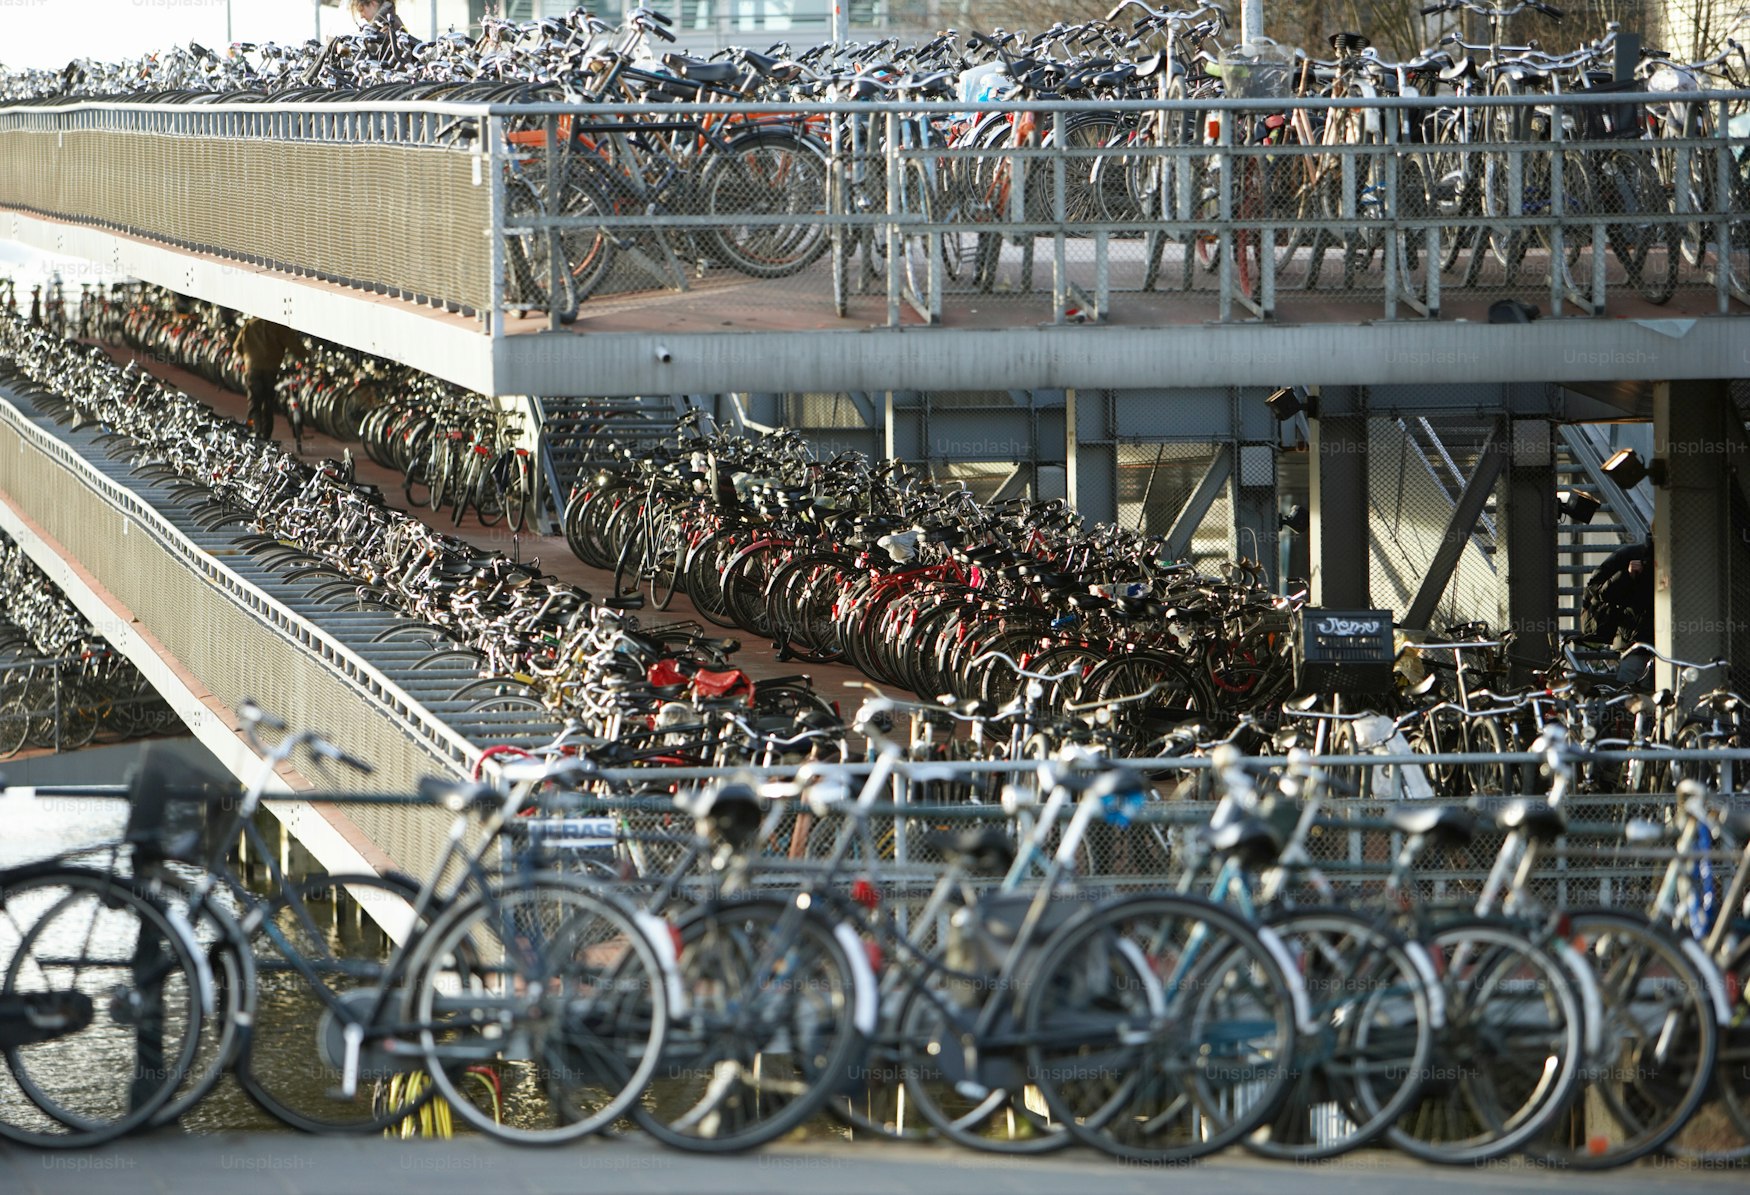 Mmm, I wonder where I left my bicycle? A view of a really big amount of bicycles parked together.